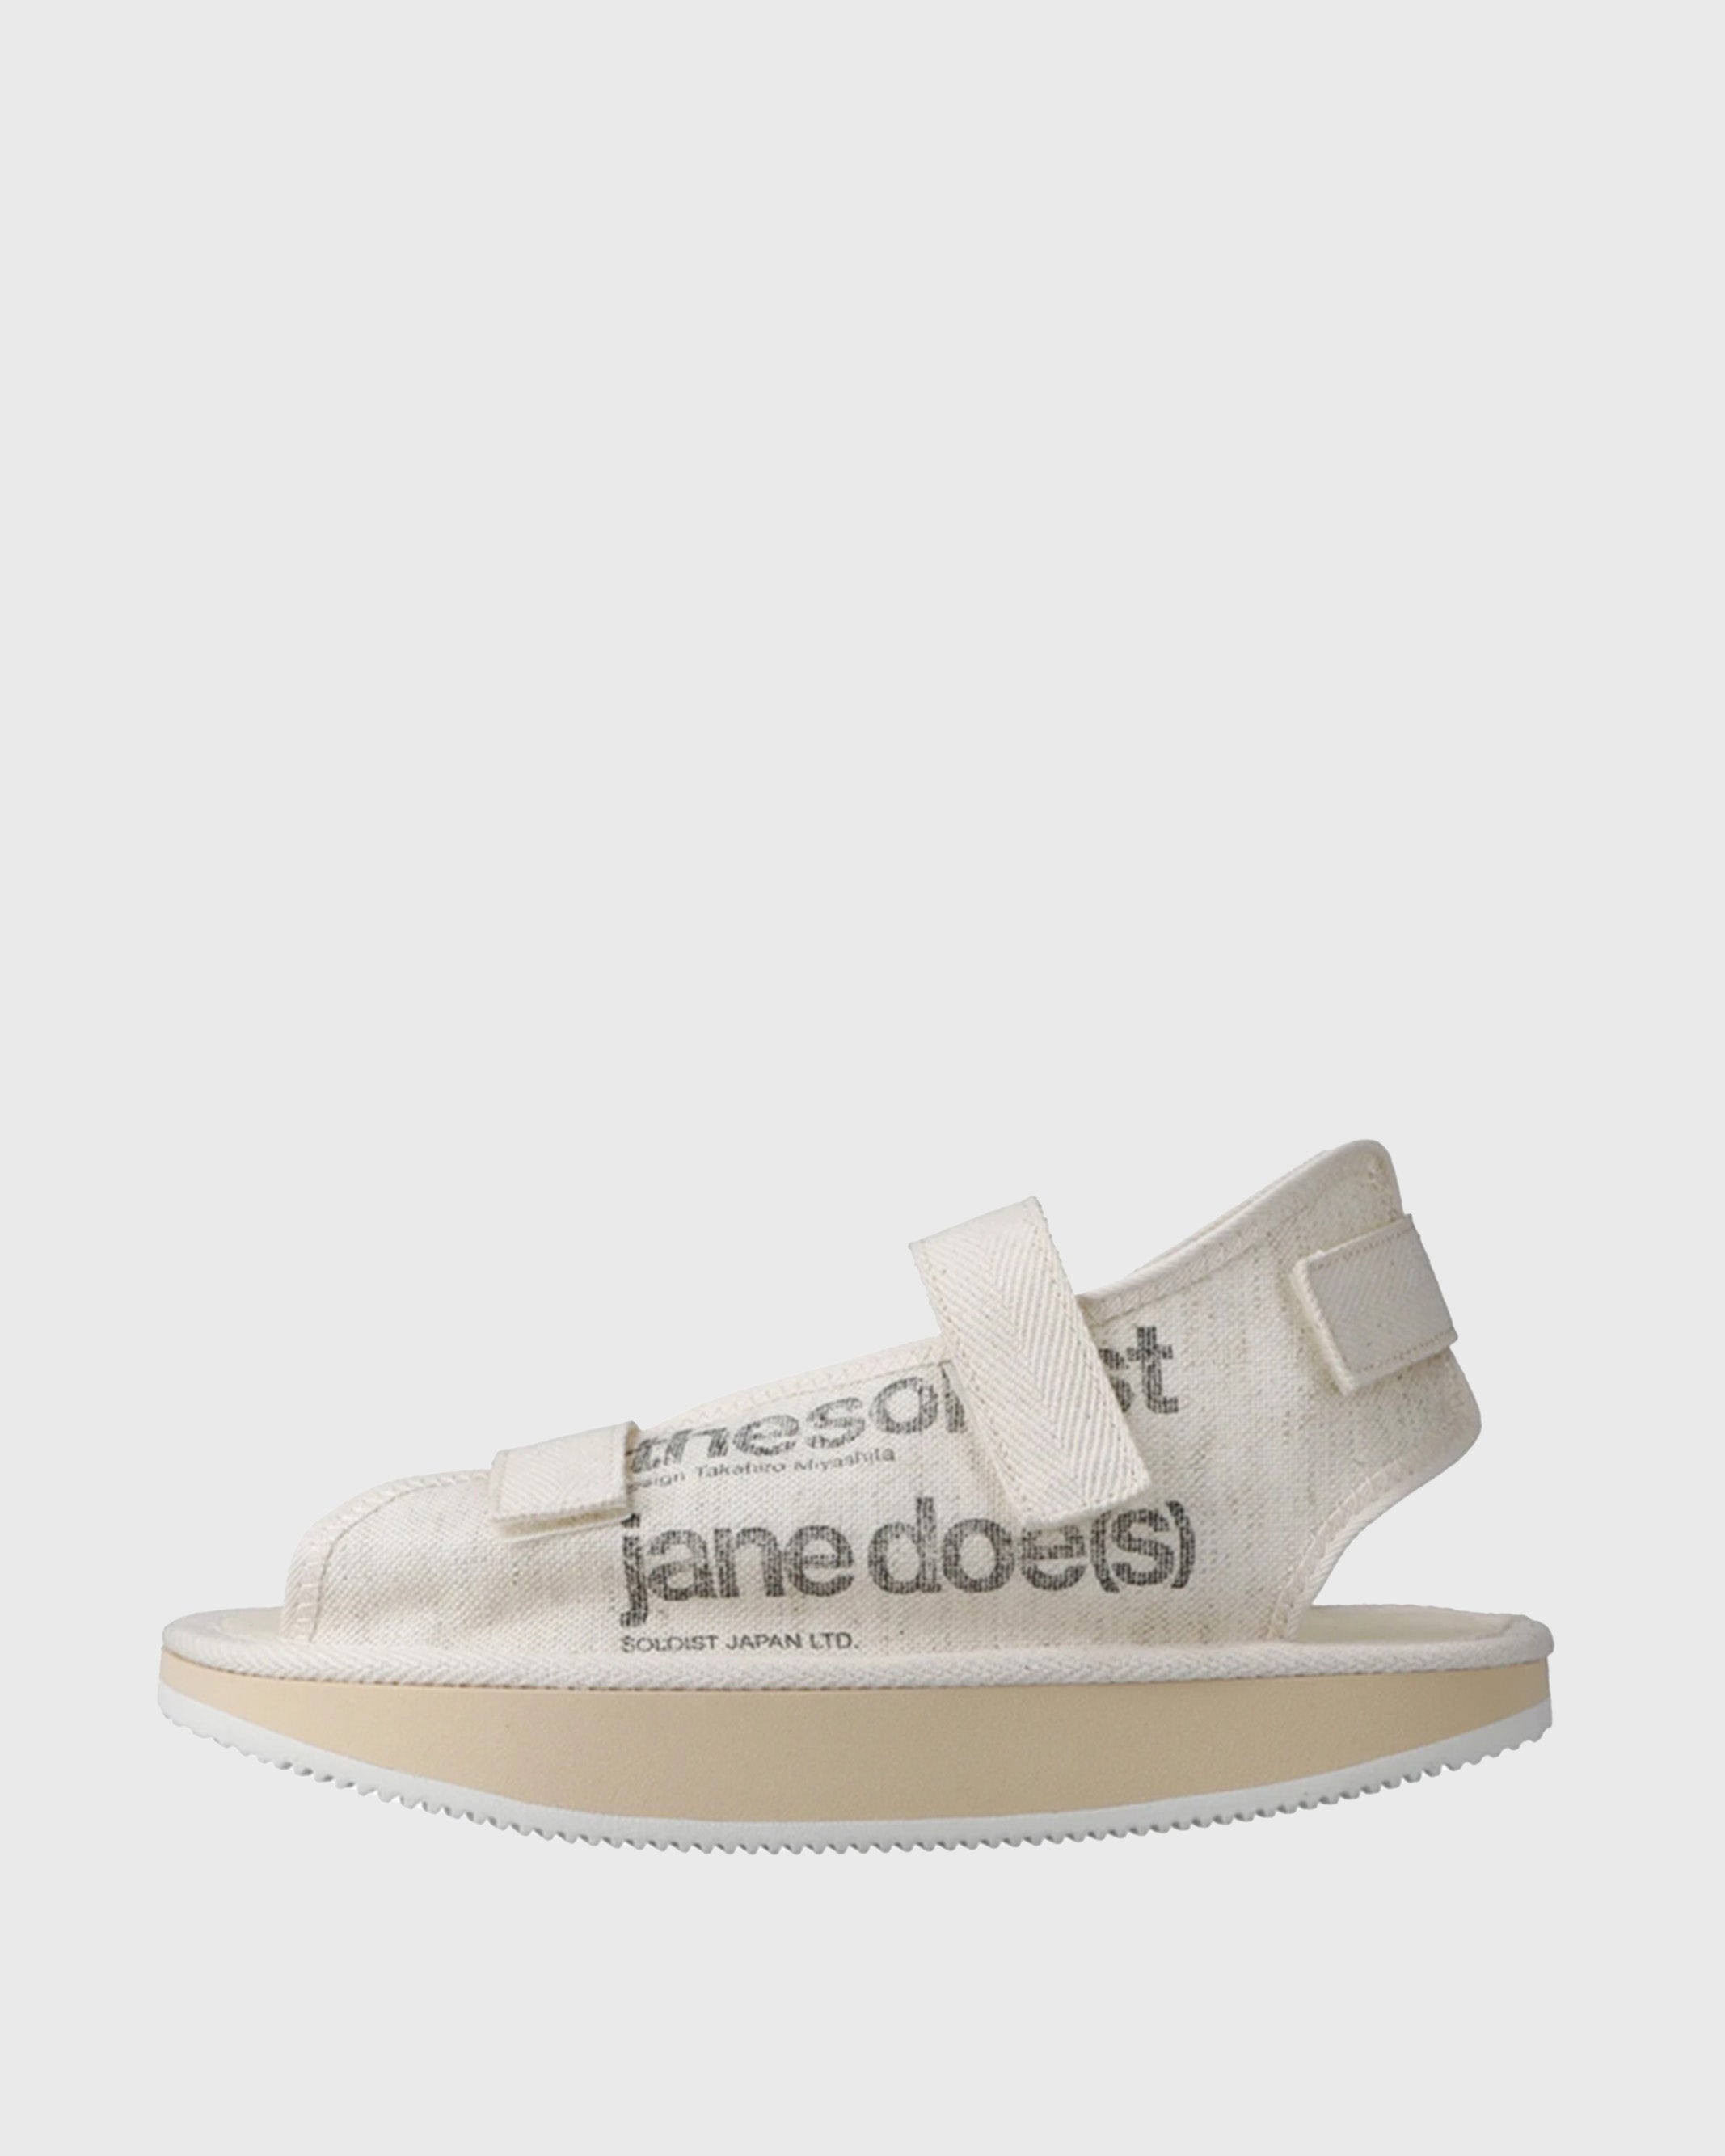 SUICOKE TAKAHIROMIYASHITATheSoloist Edition Moon-shaped Sandal JANE in Off-White OG-280-JANE | Shop from eightywingold an official brand partner for SUICOKE Canada and US.